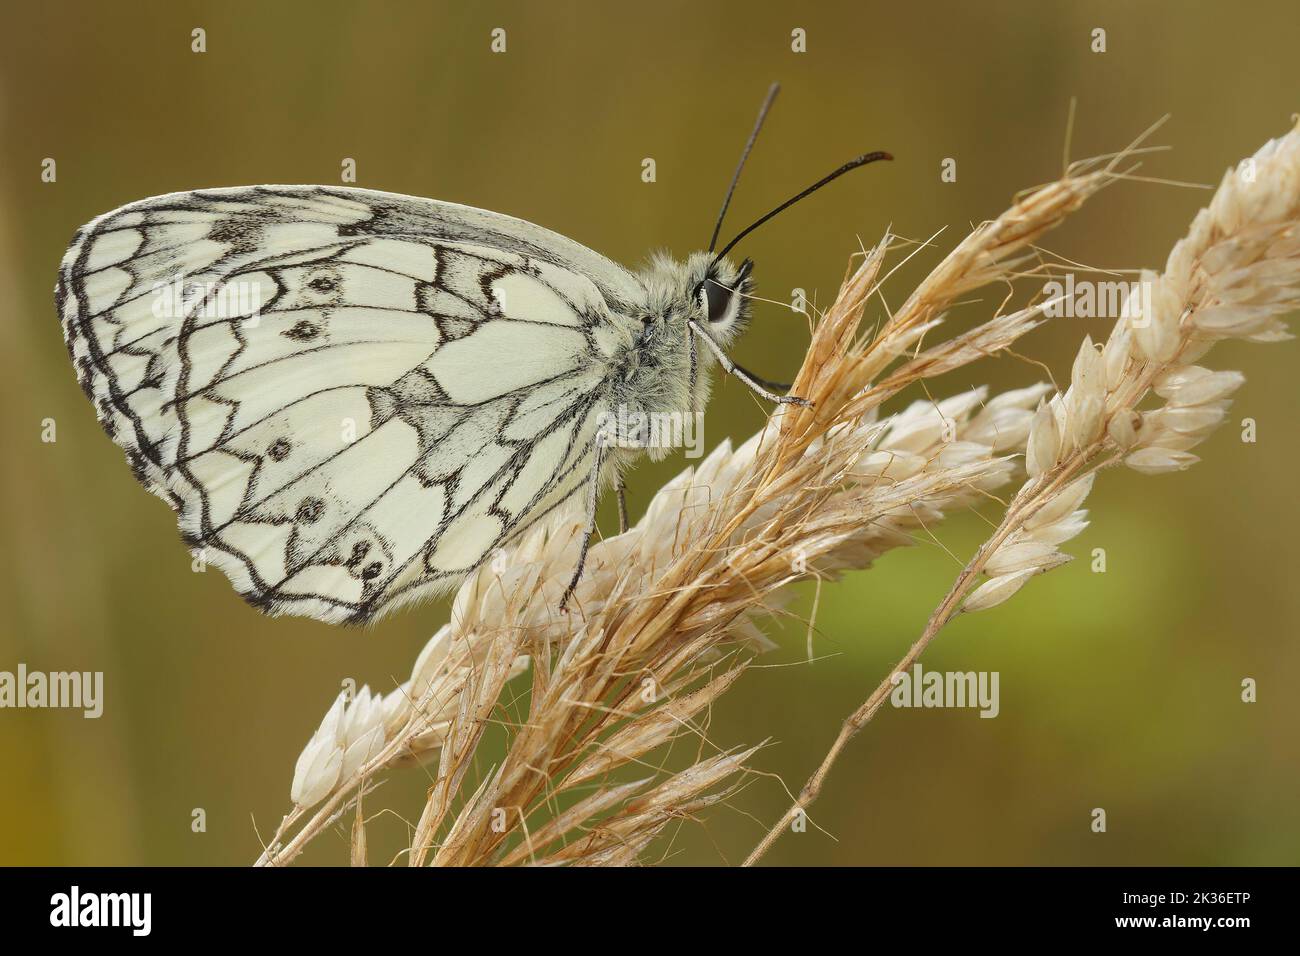 Closeup on a European marbled whhite butterfly, Melanargia galathea with sitting closed wings on a gras straw Stock Photo